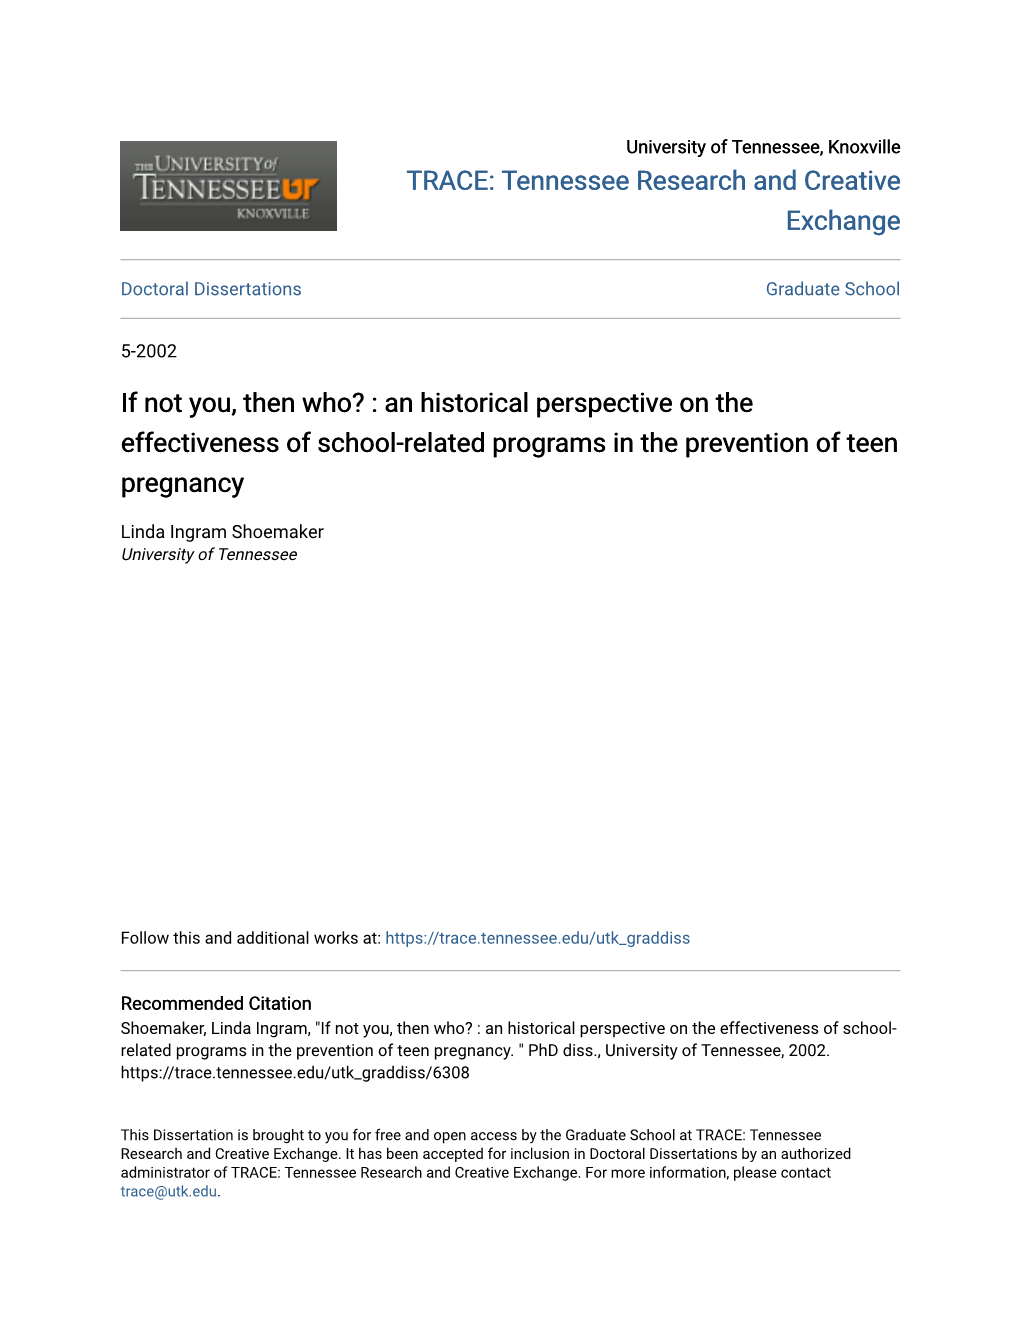 An Historical Perspective on the Effectiveness of School-Related Programs in the Prevention of Teen Pregnancy